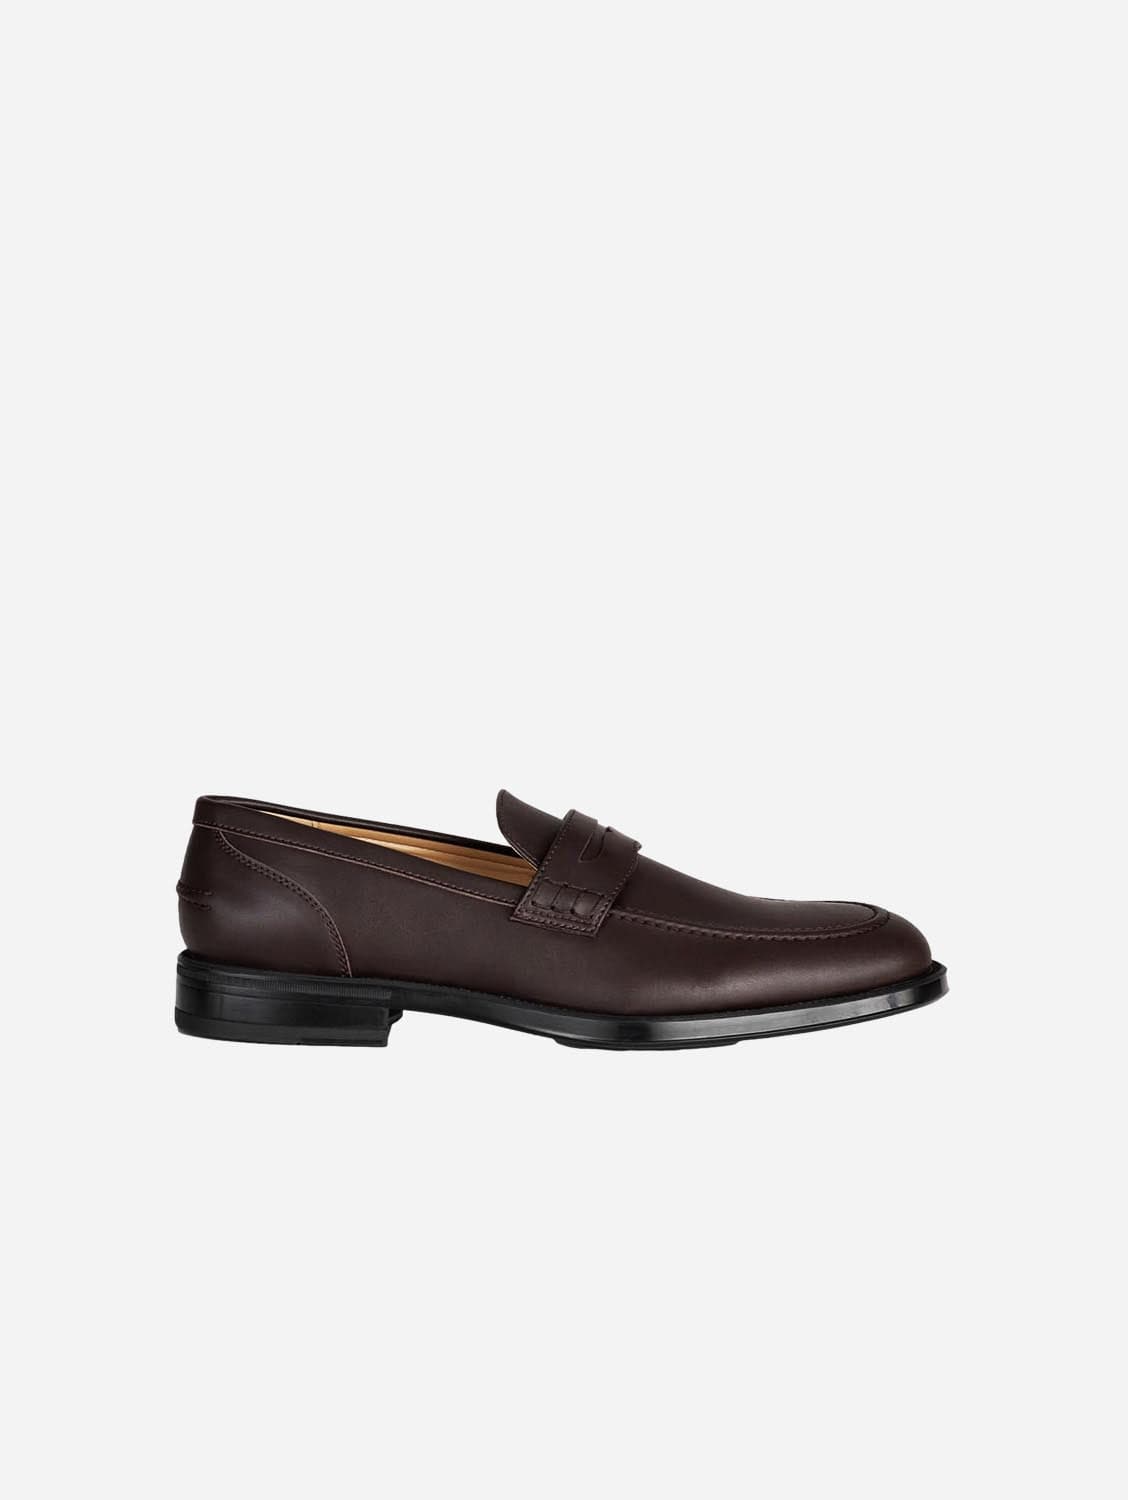 Men's Classic Shoes - Brogues, Oxfords, Loafers – Immaculate Vegan